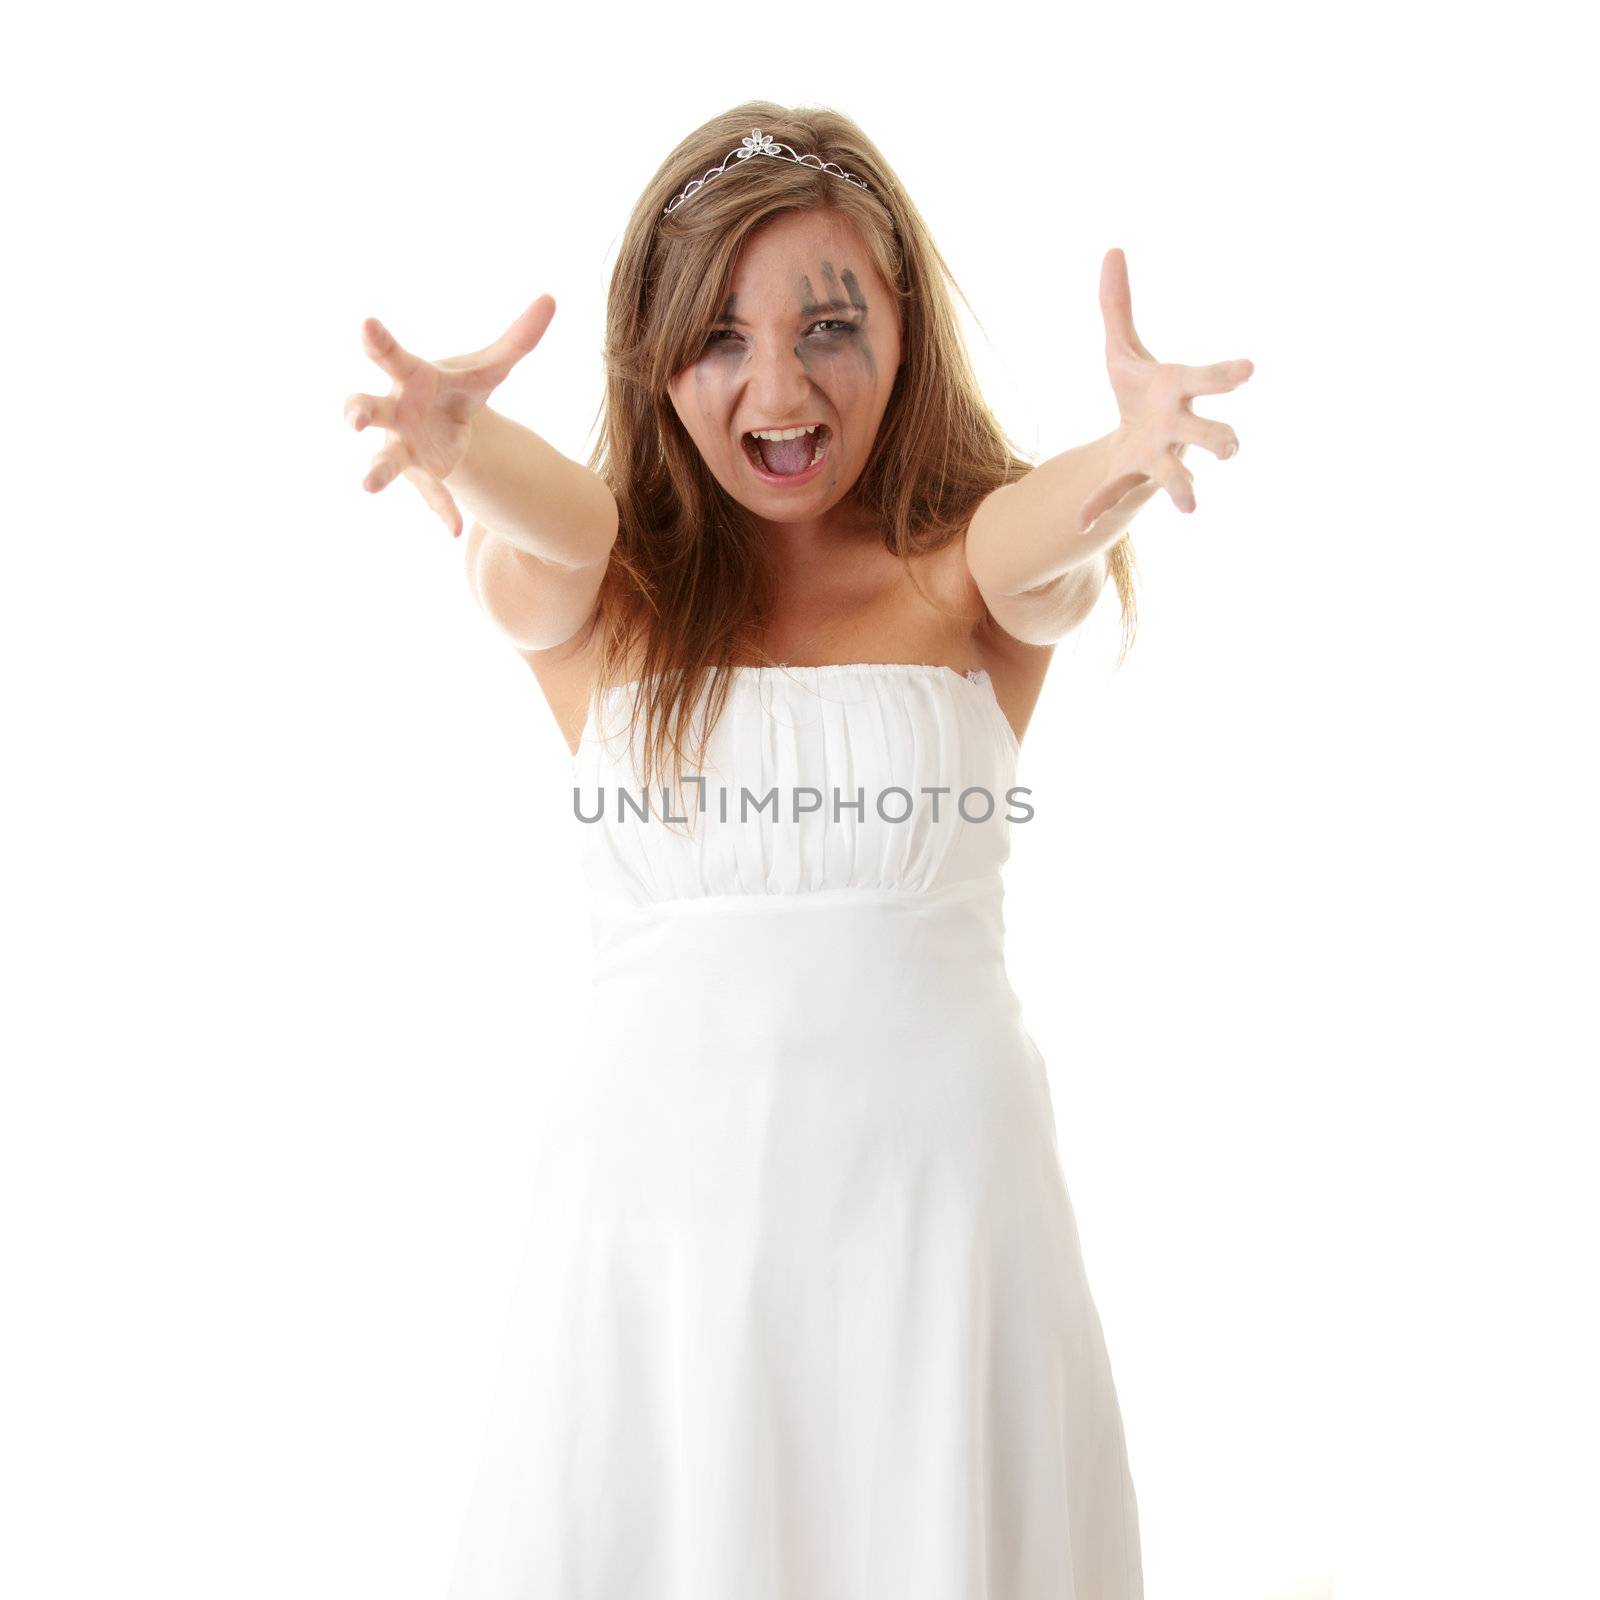 Young angry princess in white dress - focus on face